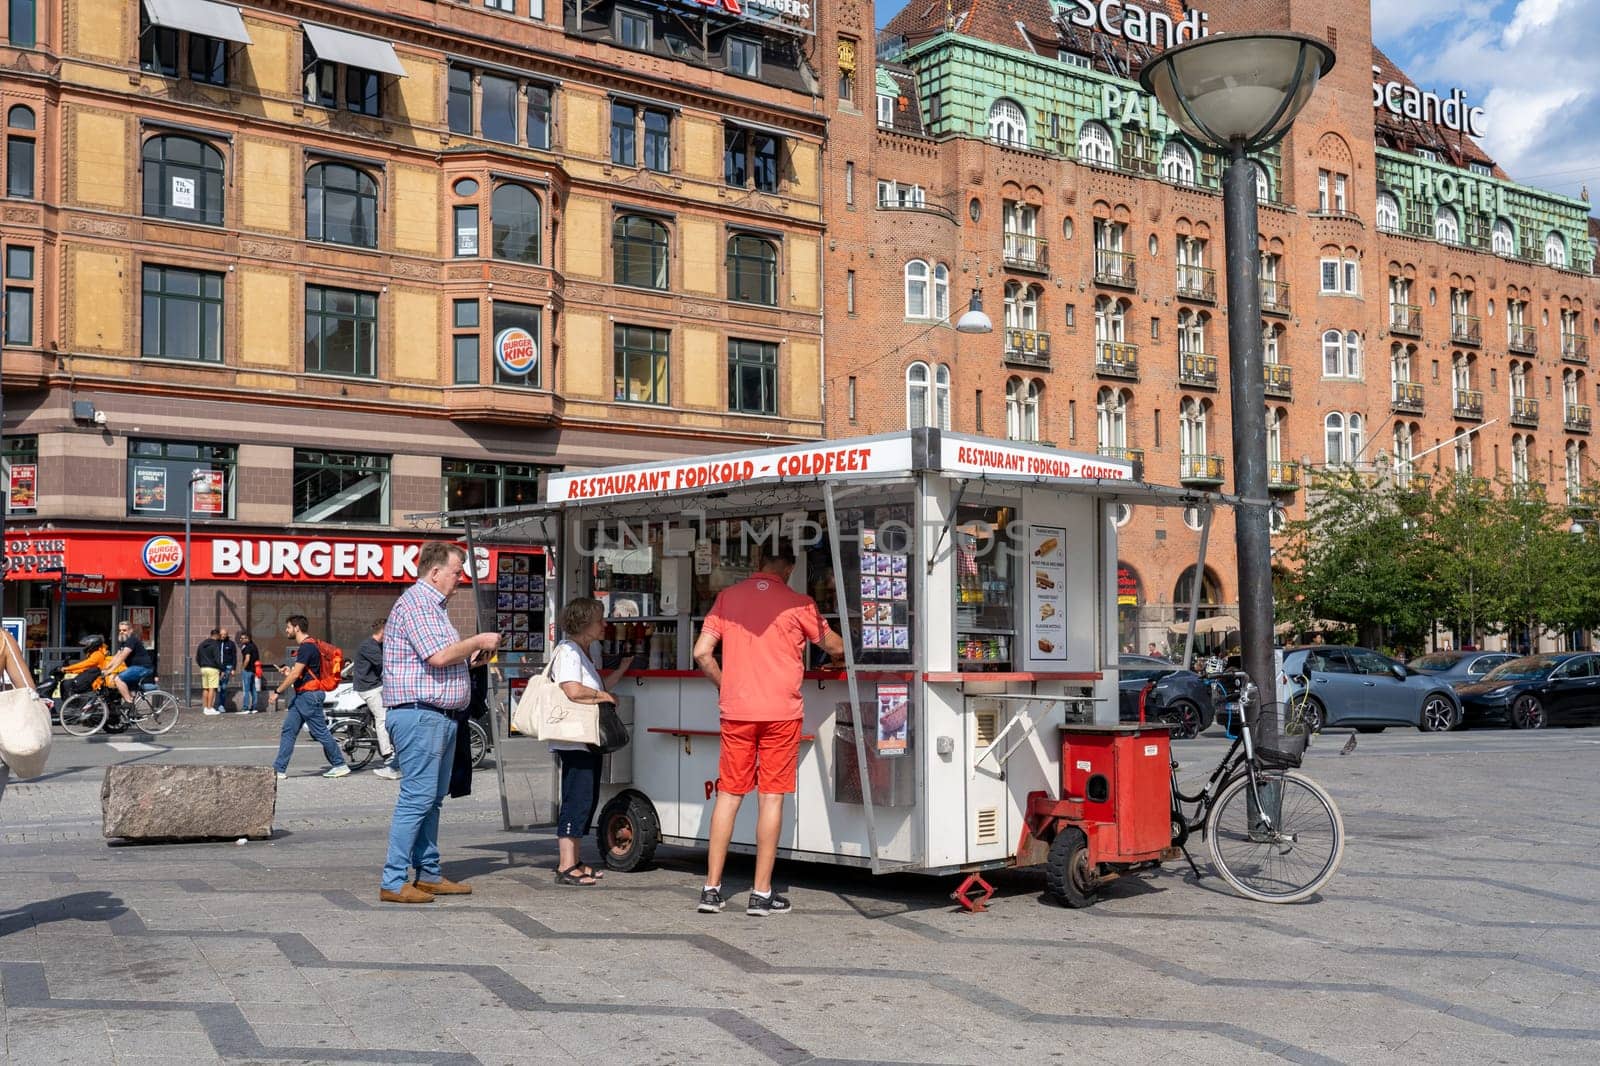 Copenhagen, Denmark - July 14, 2023: Customers at a traditional hot dog cart on the town hall square.